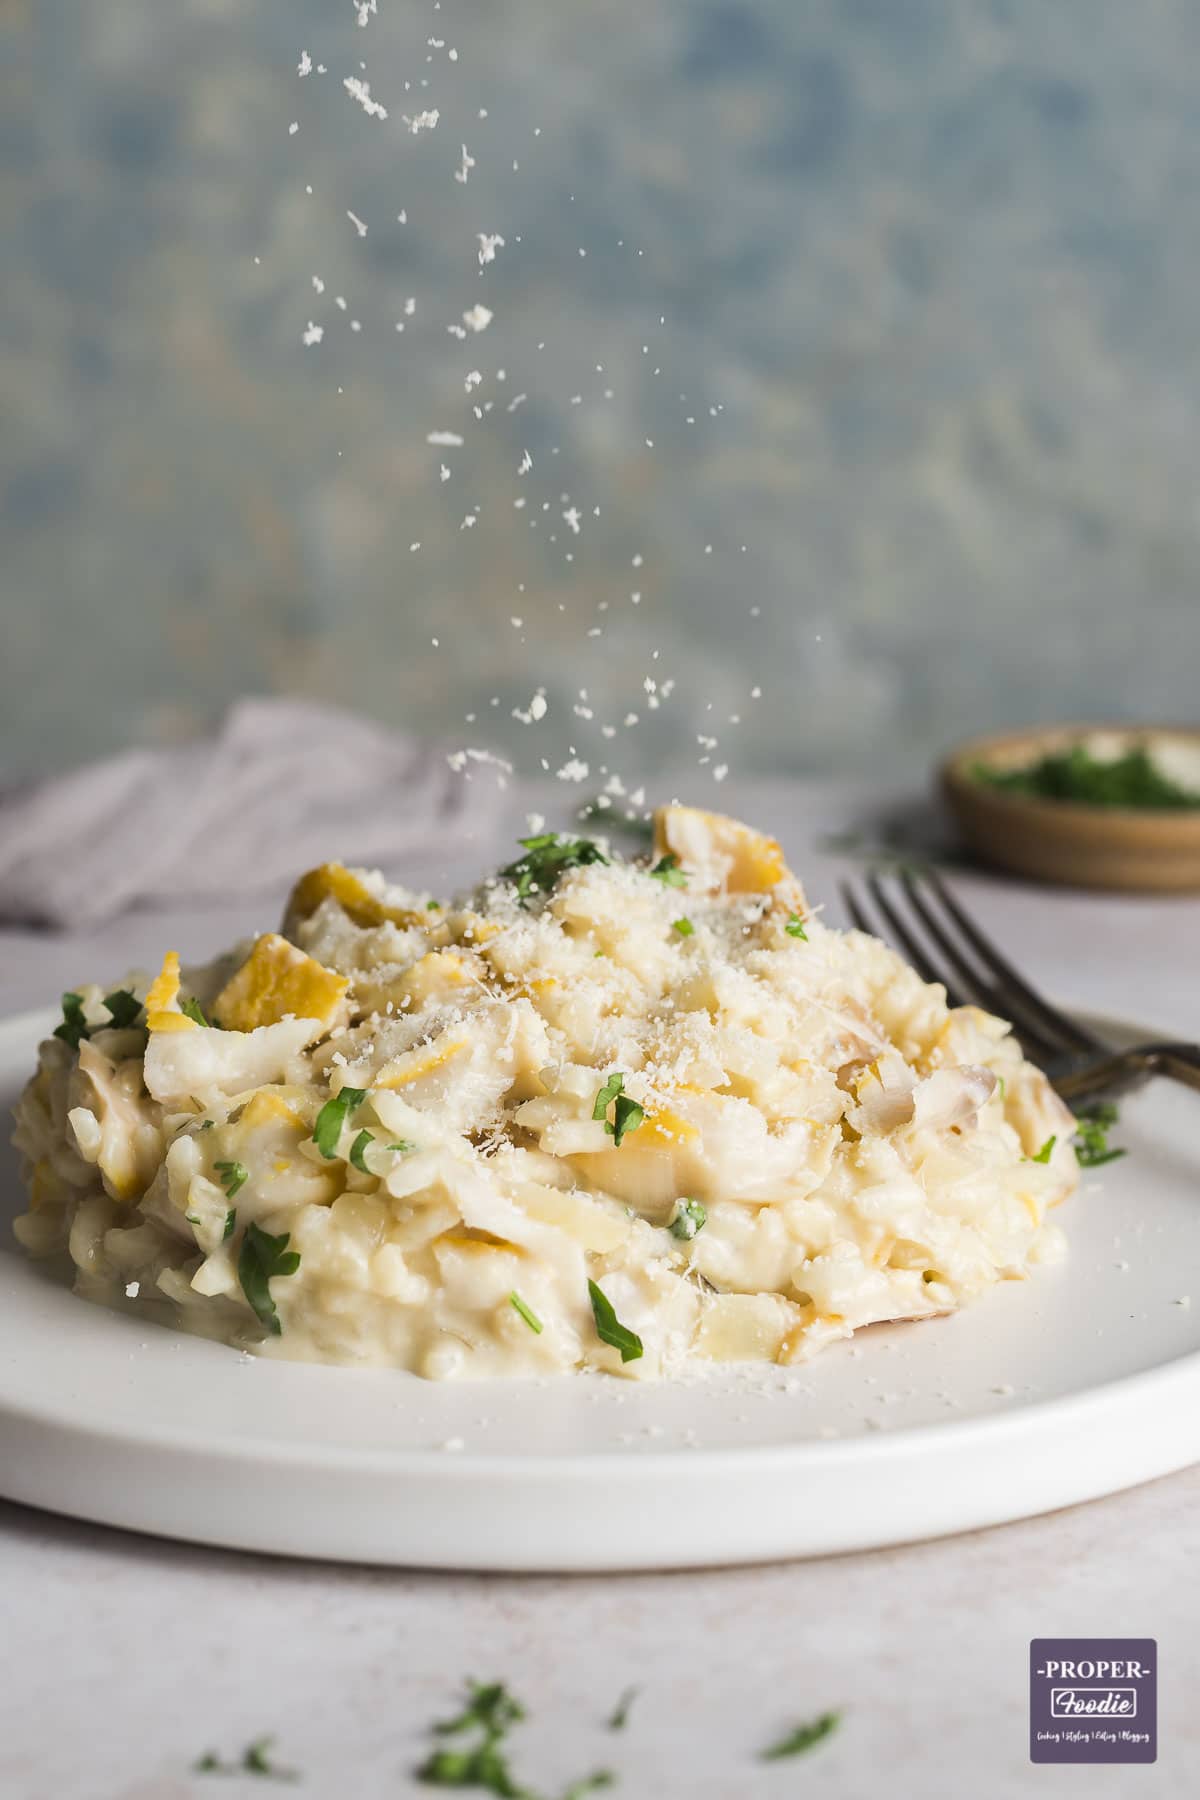 Creamy smoked haddock risotto piled neatly on a small plate, with parmesan being sprinkle on top.